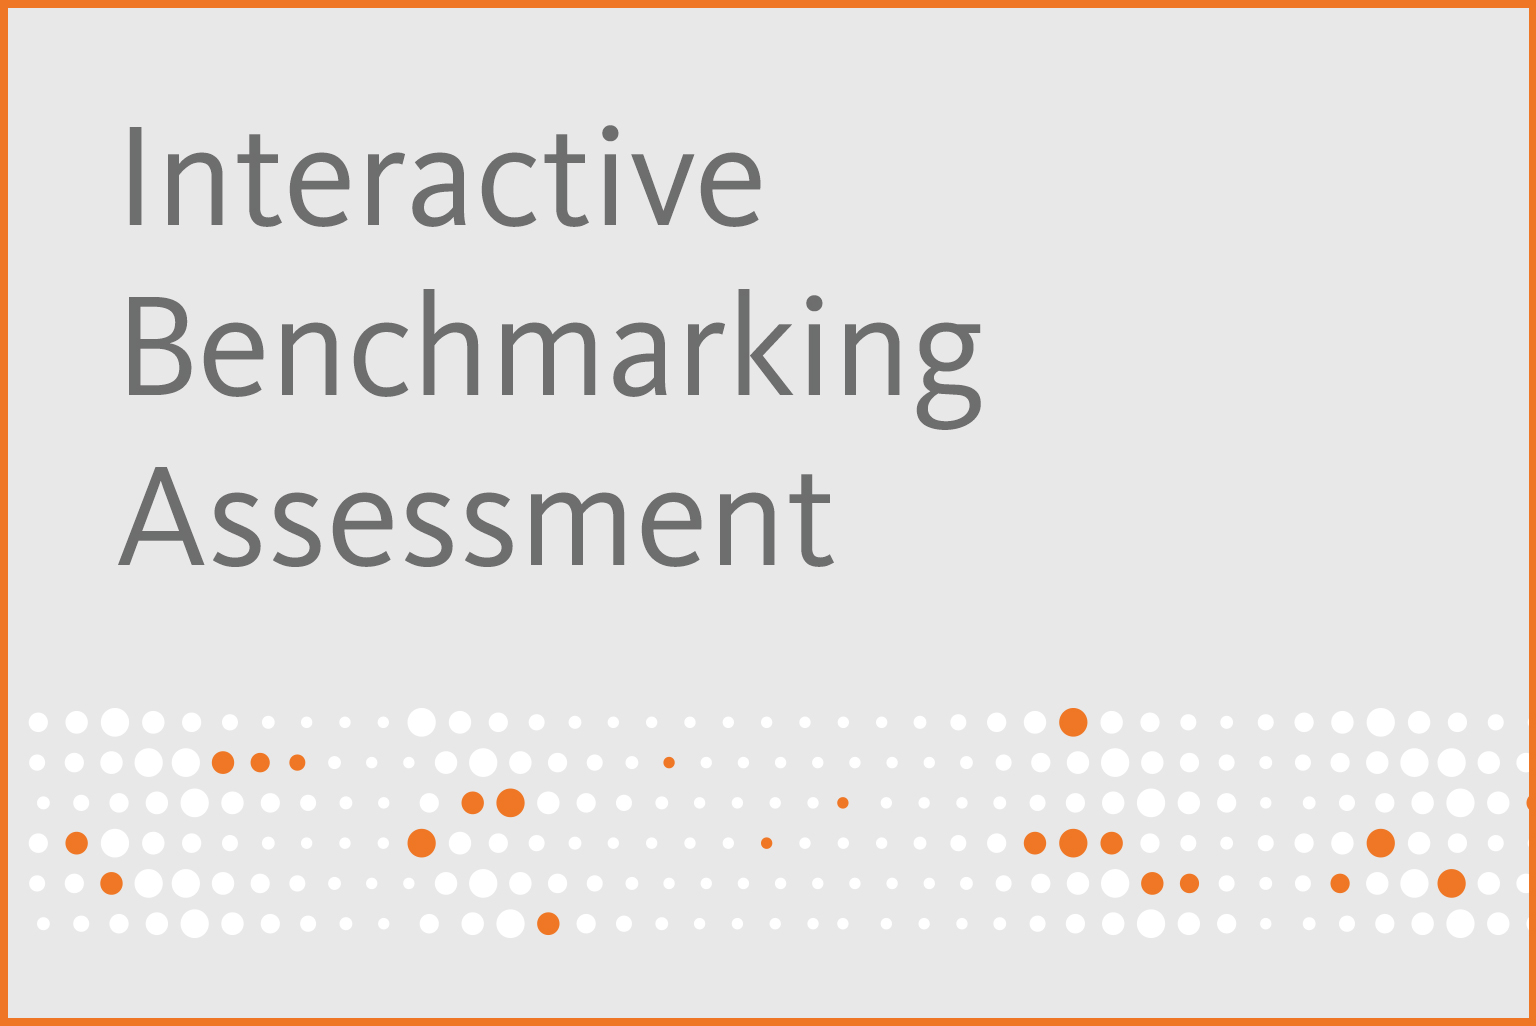 Interactive Benchmarking Assessment